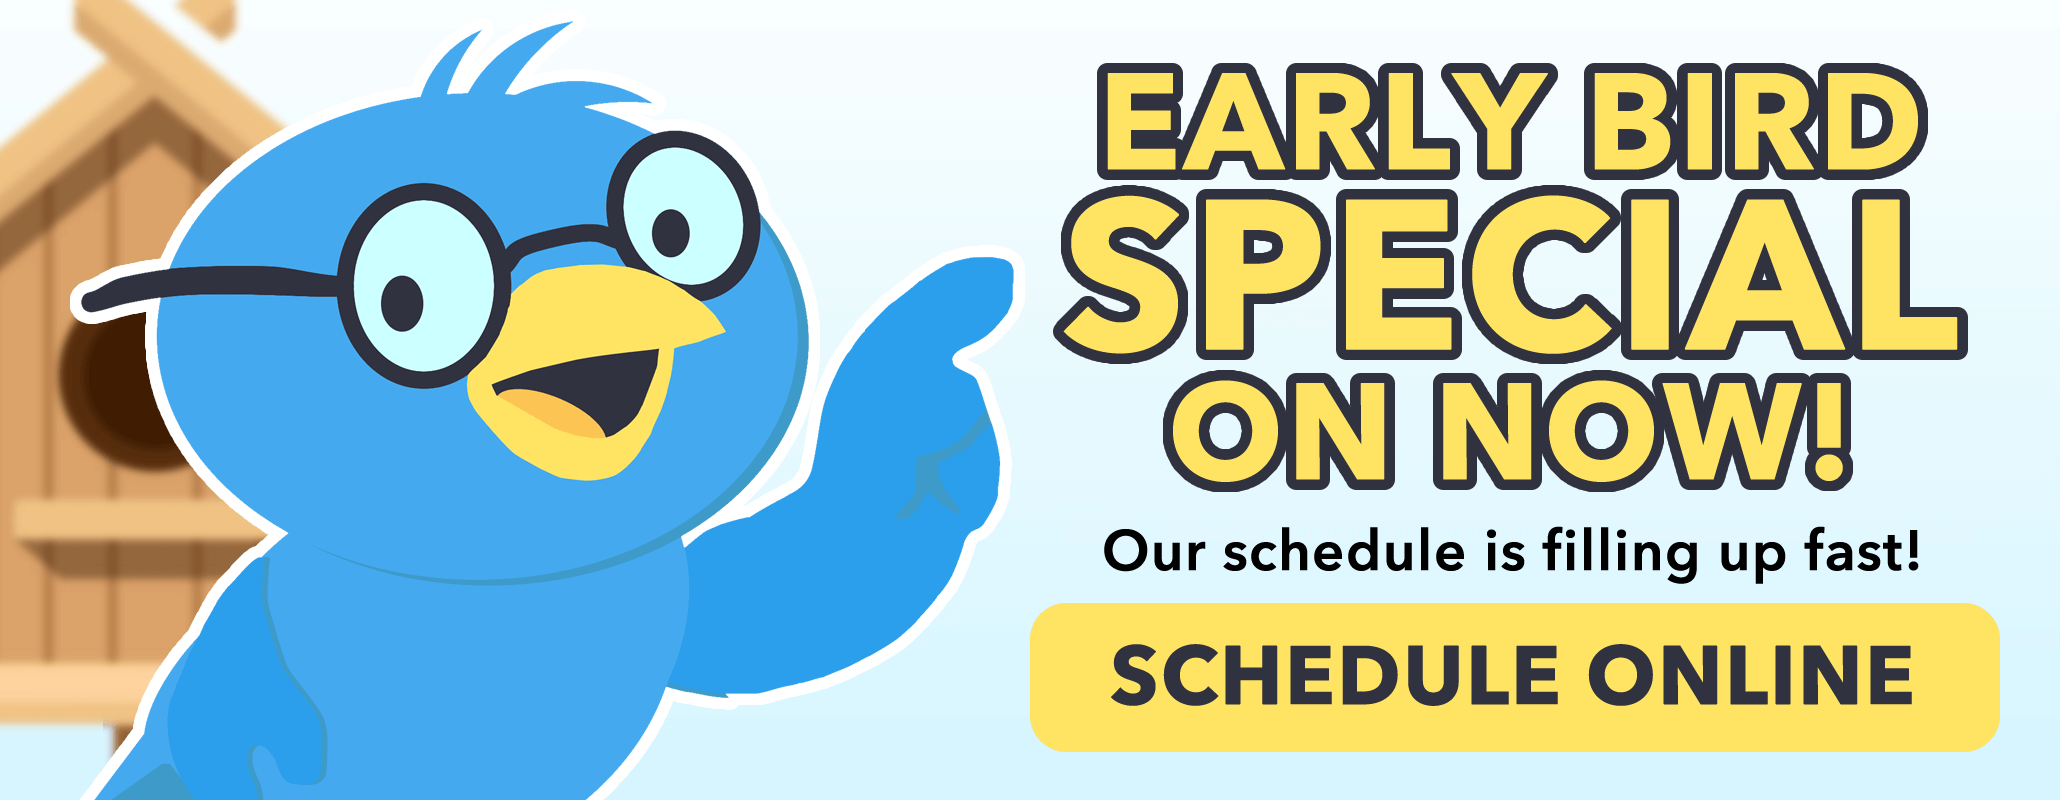 Once kids are back in school, our schedule starts to fill up quick. Don't wait until it's too late. Book your tune-up online now for the Early Bird Special!